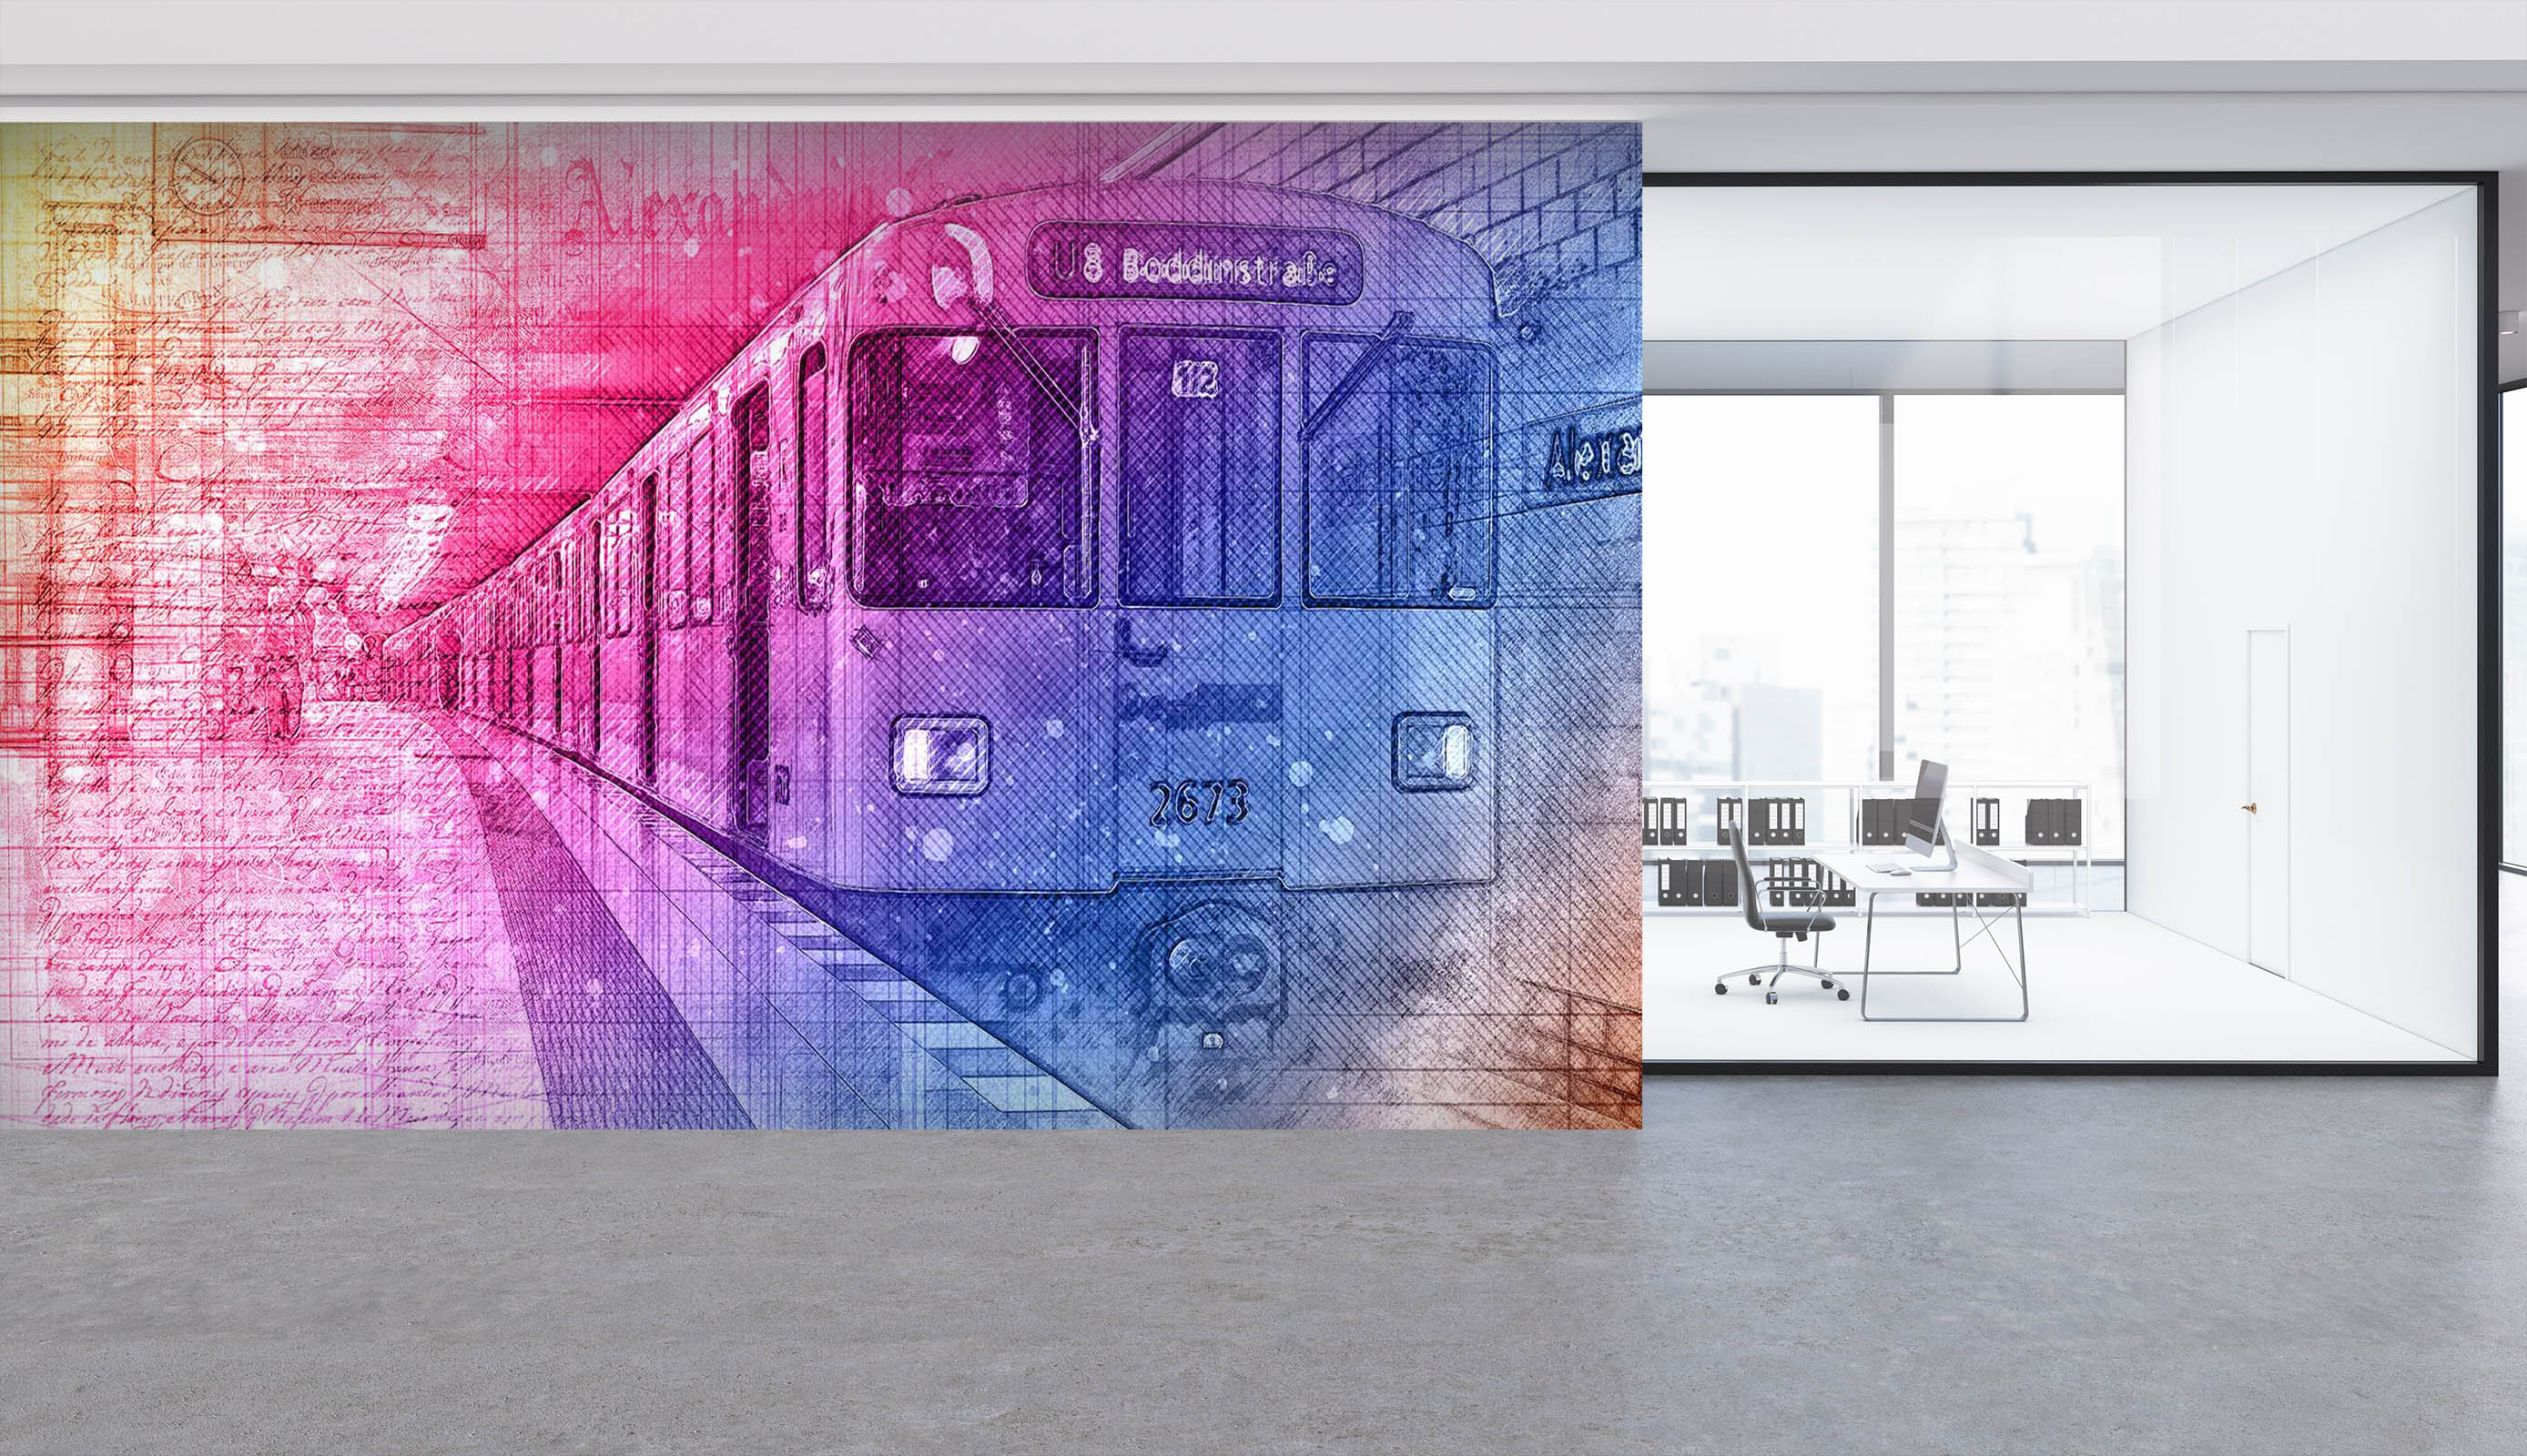 3D Red Train Pattern 046 Vehicle Wall Murals